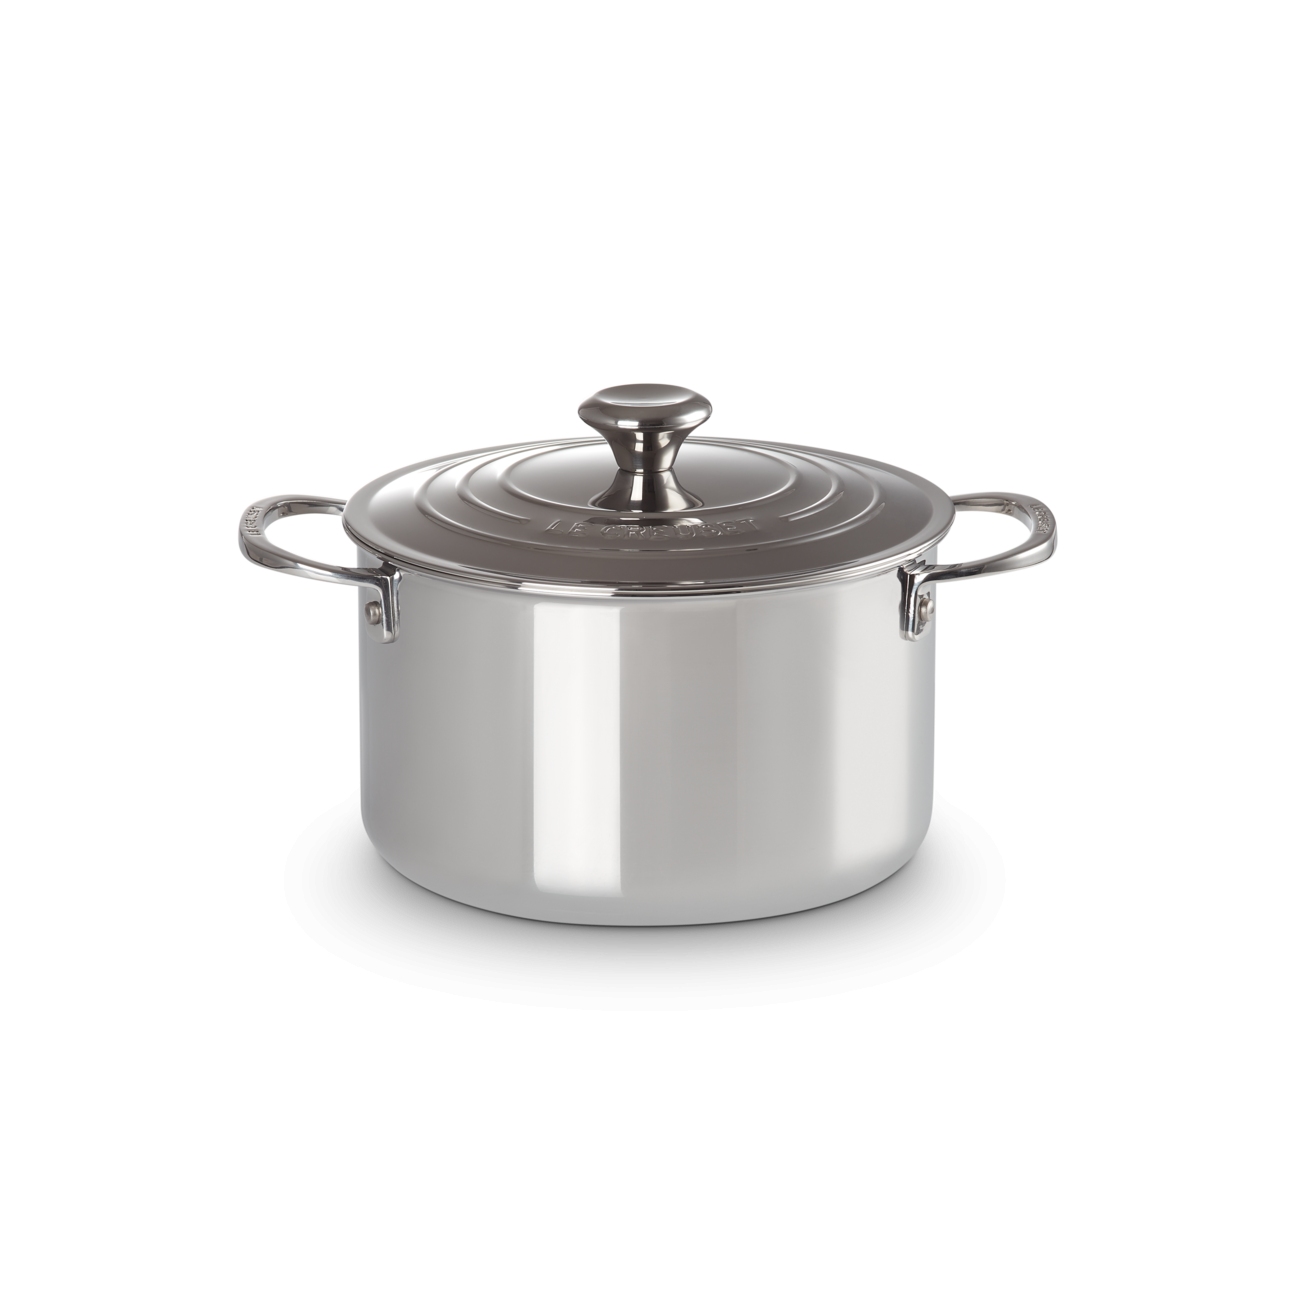 Le Creuset Signature Stainless Steel Deep Casserole with Lid 18